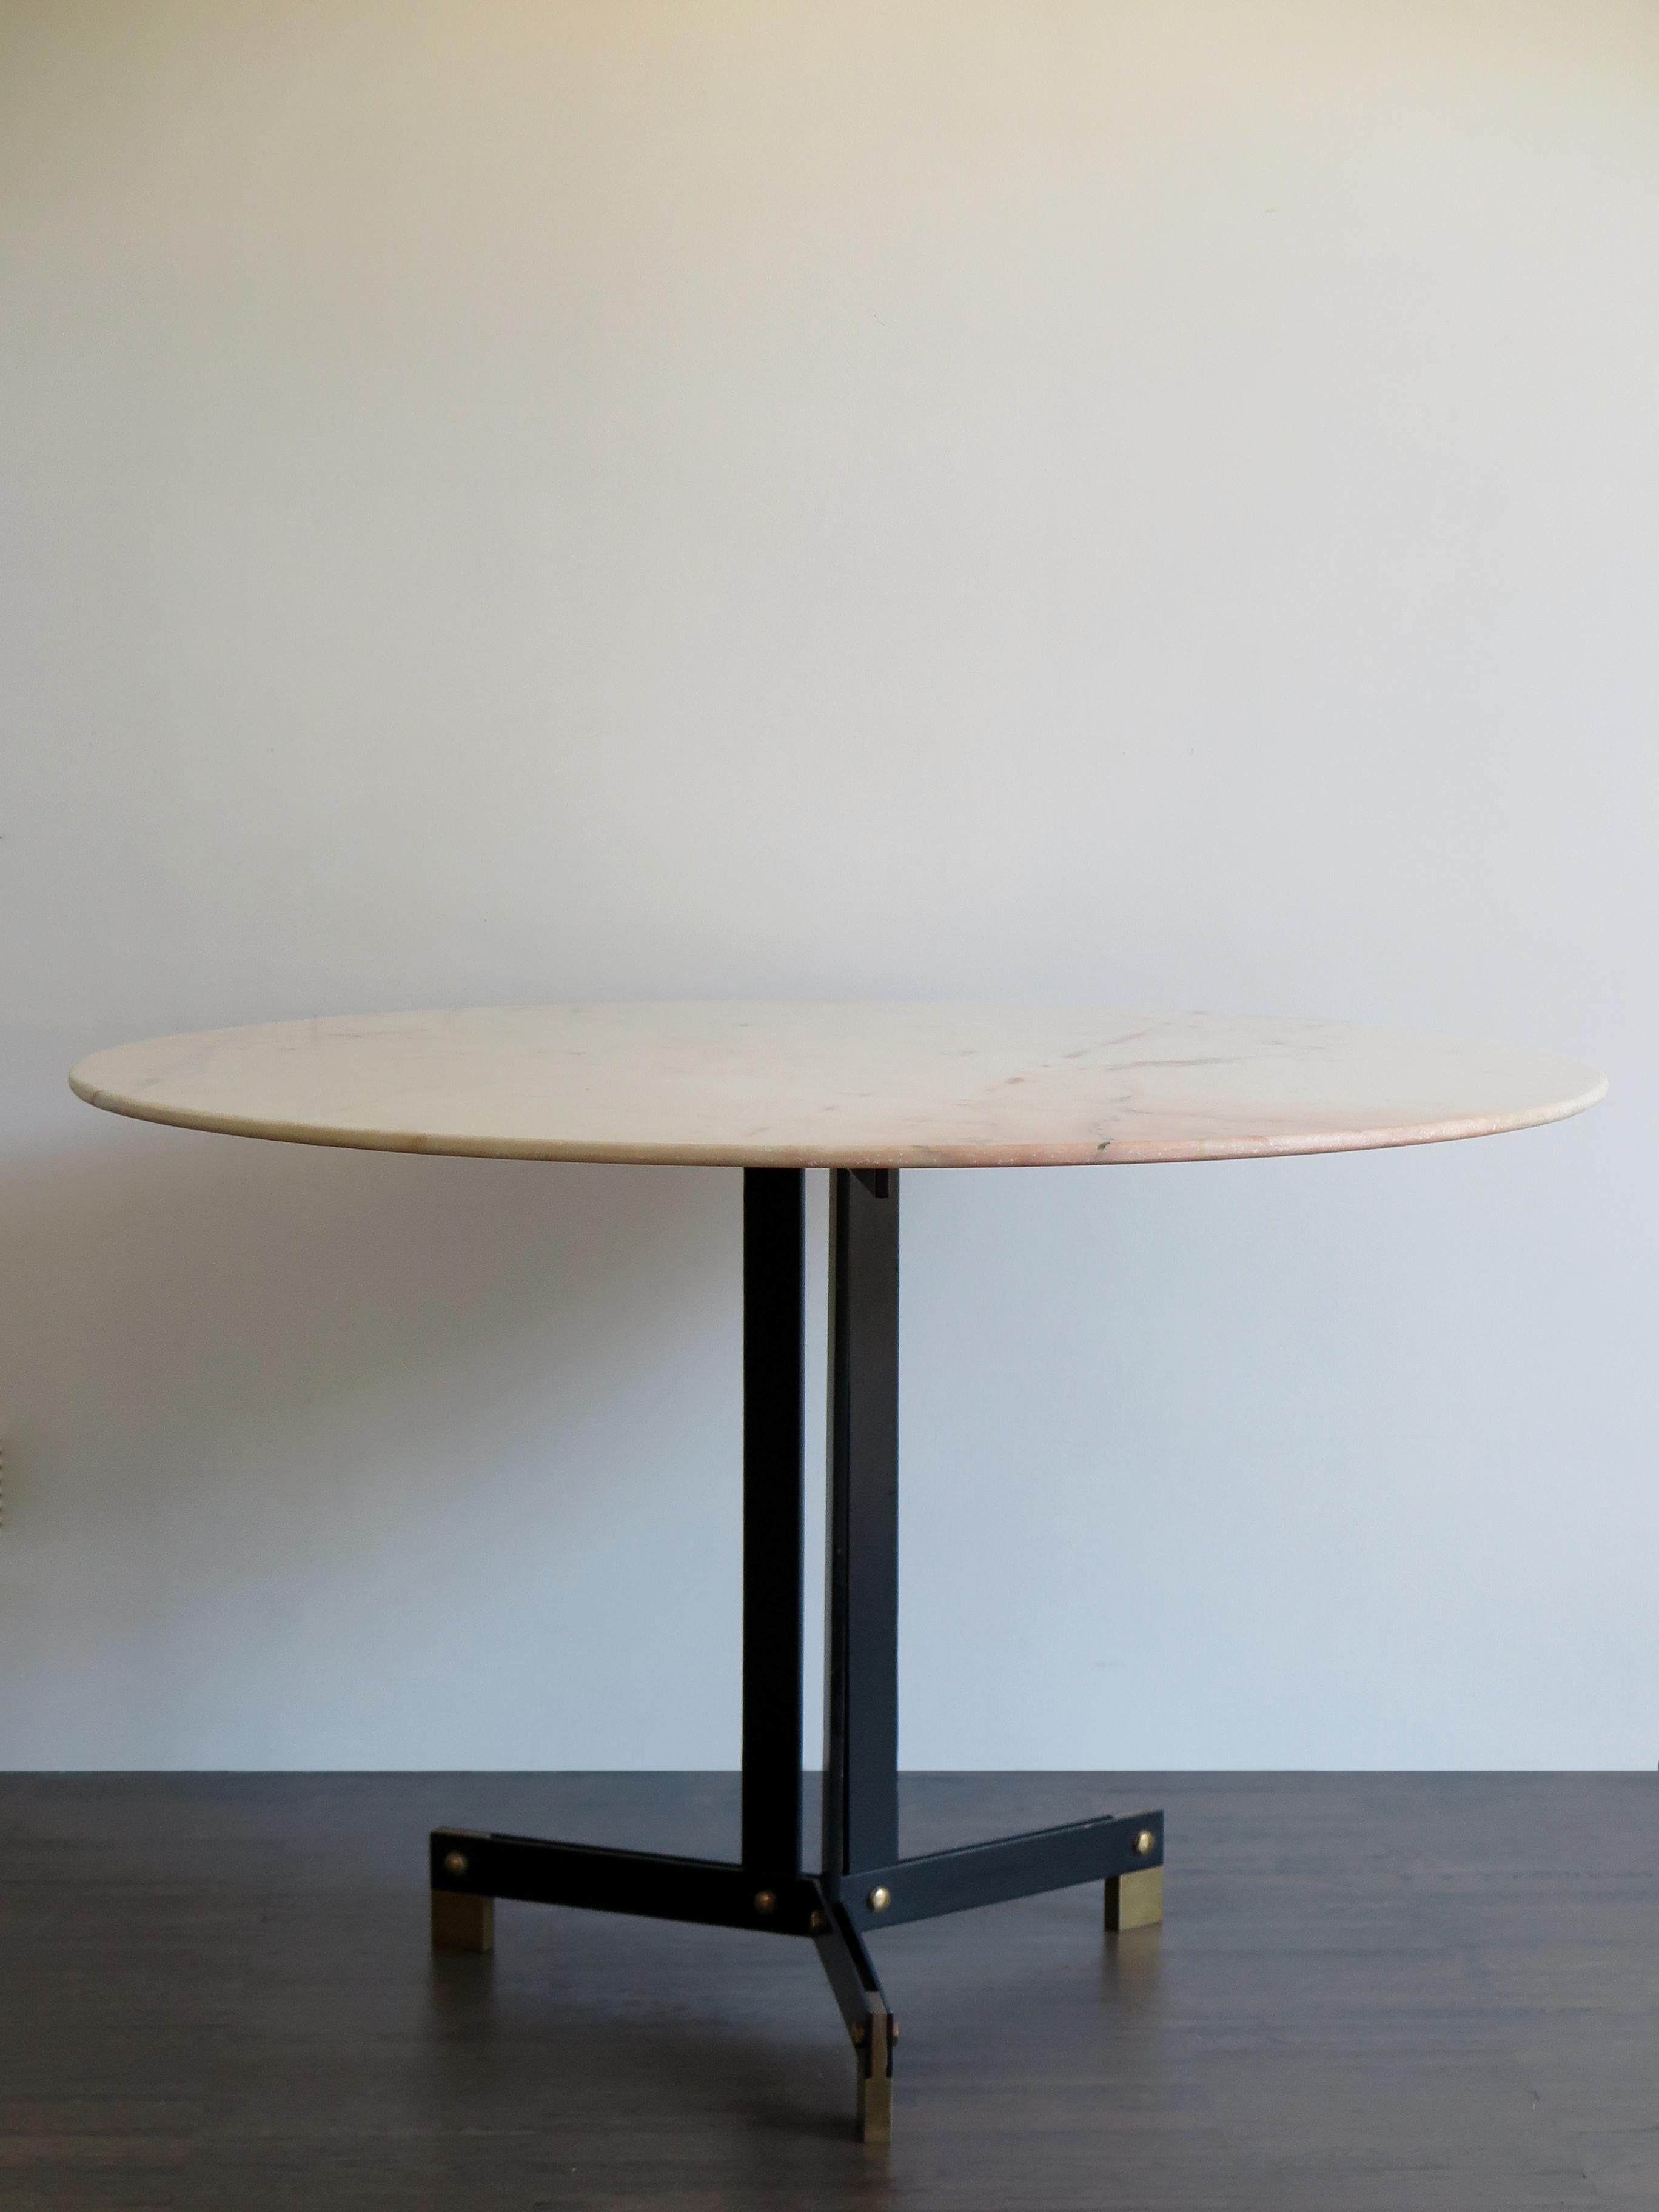 Italian Mid-Century Modern design dining table with round Candoglia marble top and black laquared metal frame and brass feet and details, Ignazio Gardella attributed, Italy circa 1950.
The marble top rests on the metal structure.

Please note